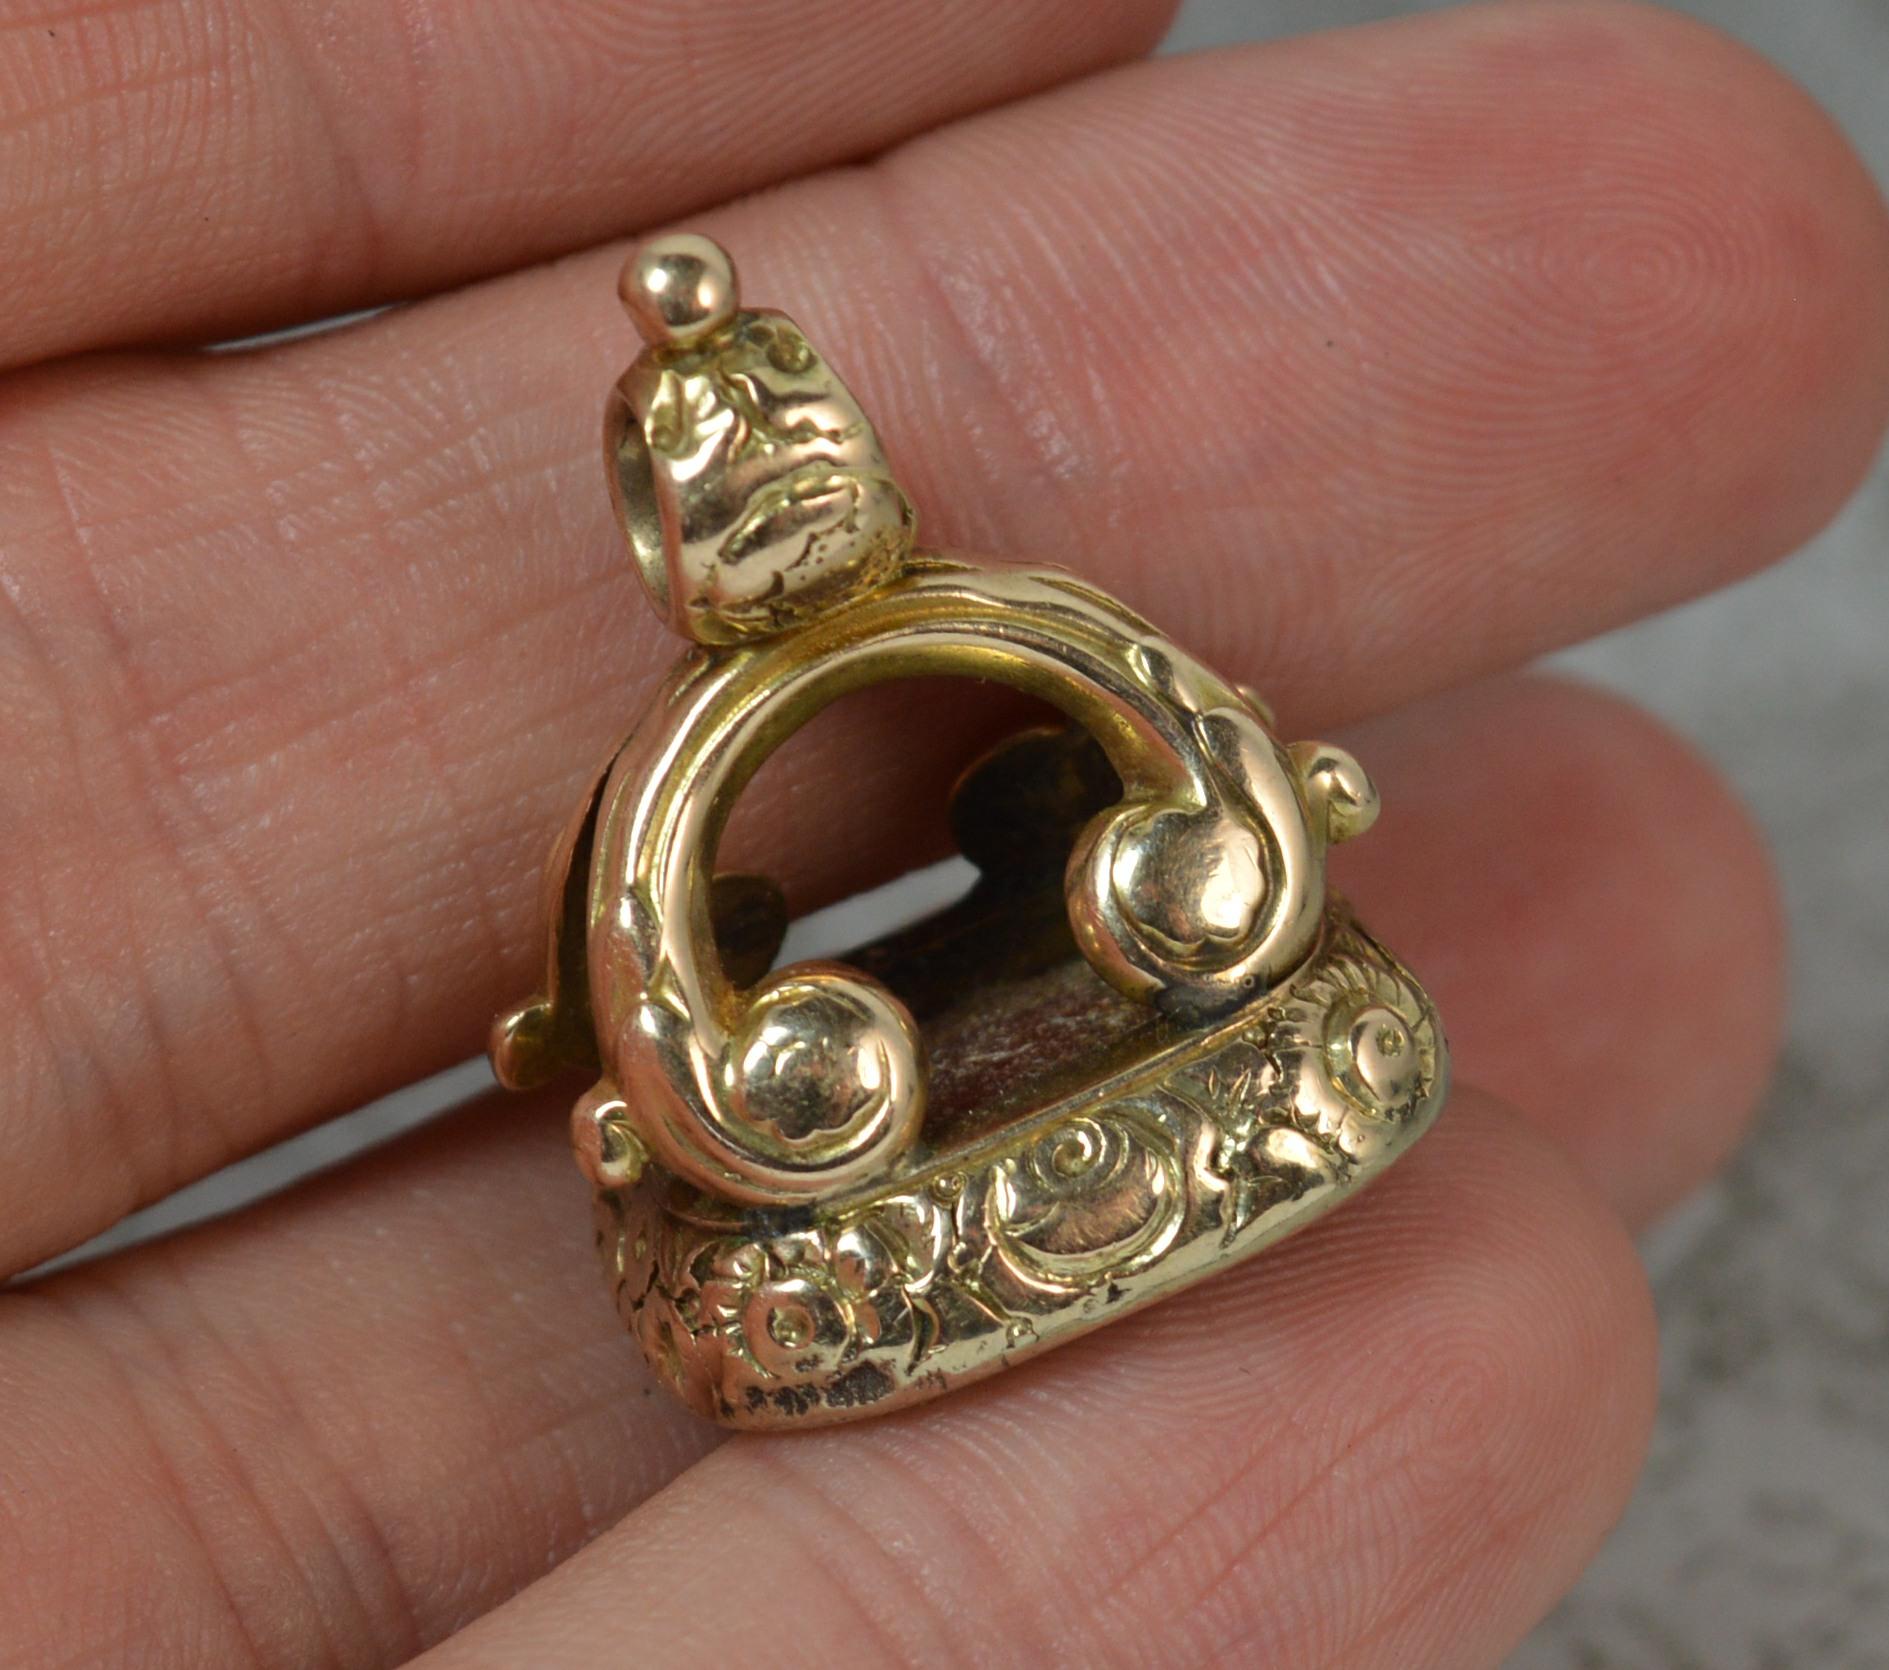 An incredibly rare Georgian period intaglio seal watch fob pendant.

Solid gold case with floral engraving and carnelian set to base.

The intaglio engraved with; a banner to top to read La Belle Alliance and below June 18th 1815.

The Belle